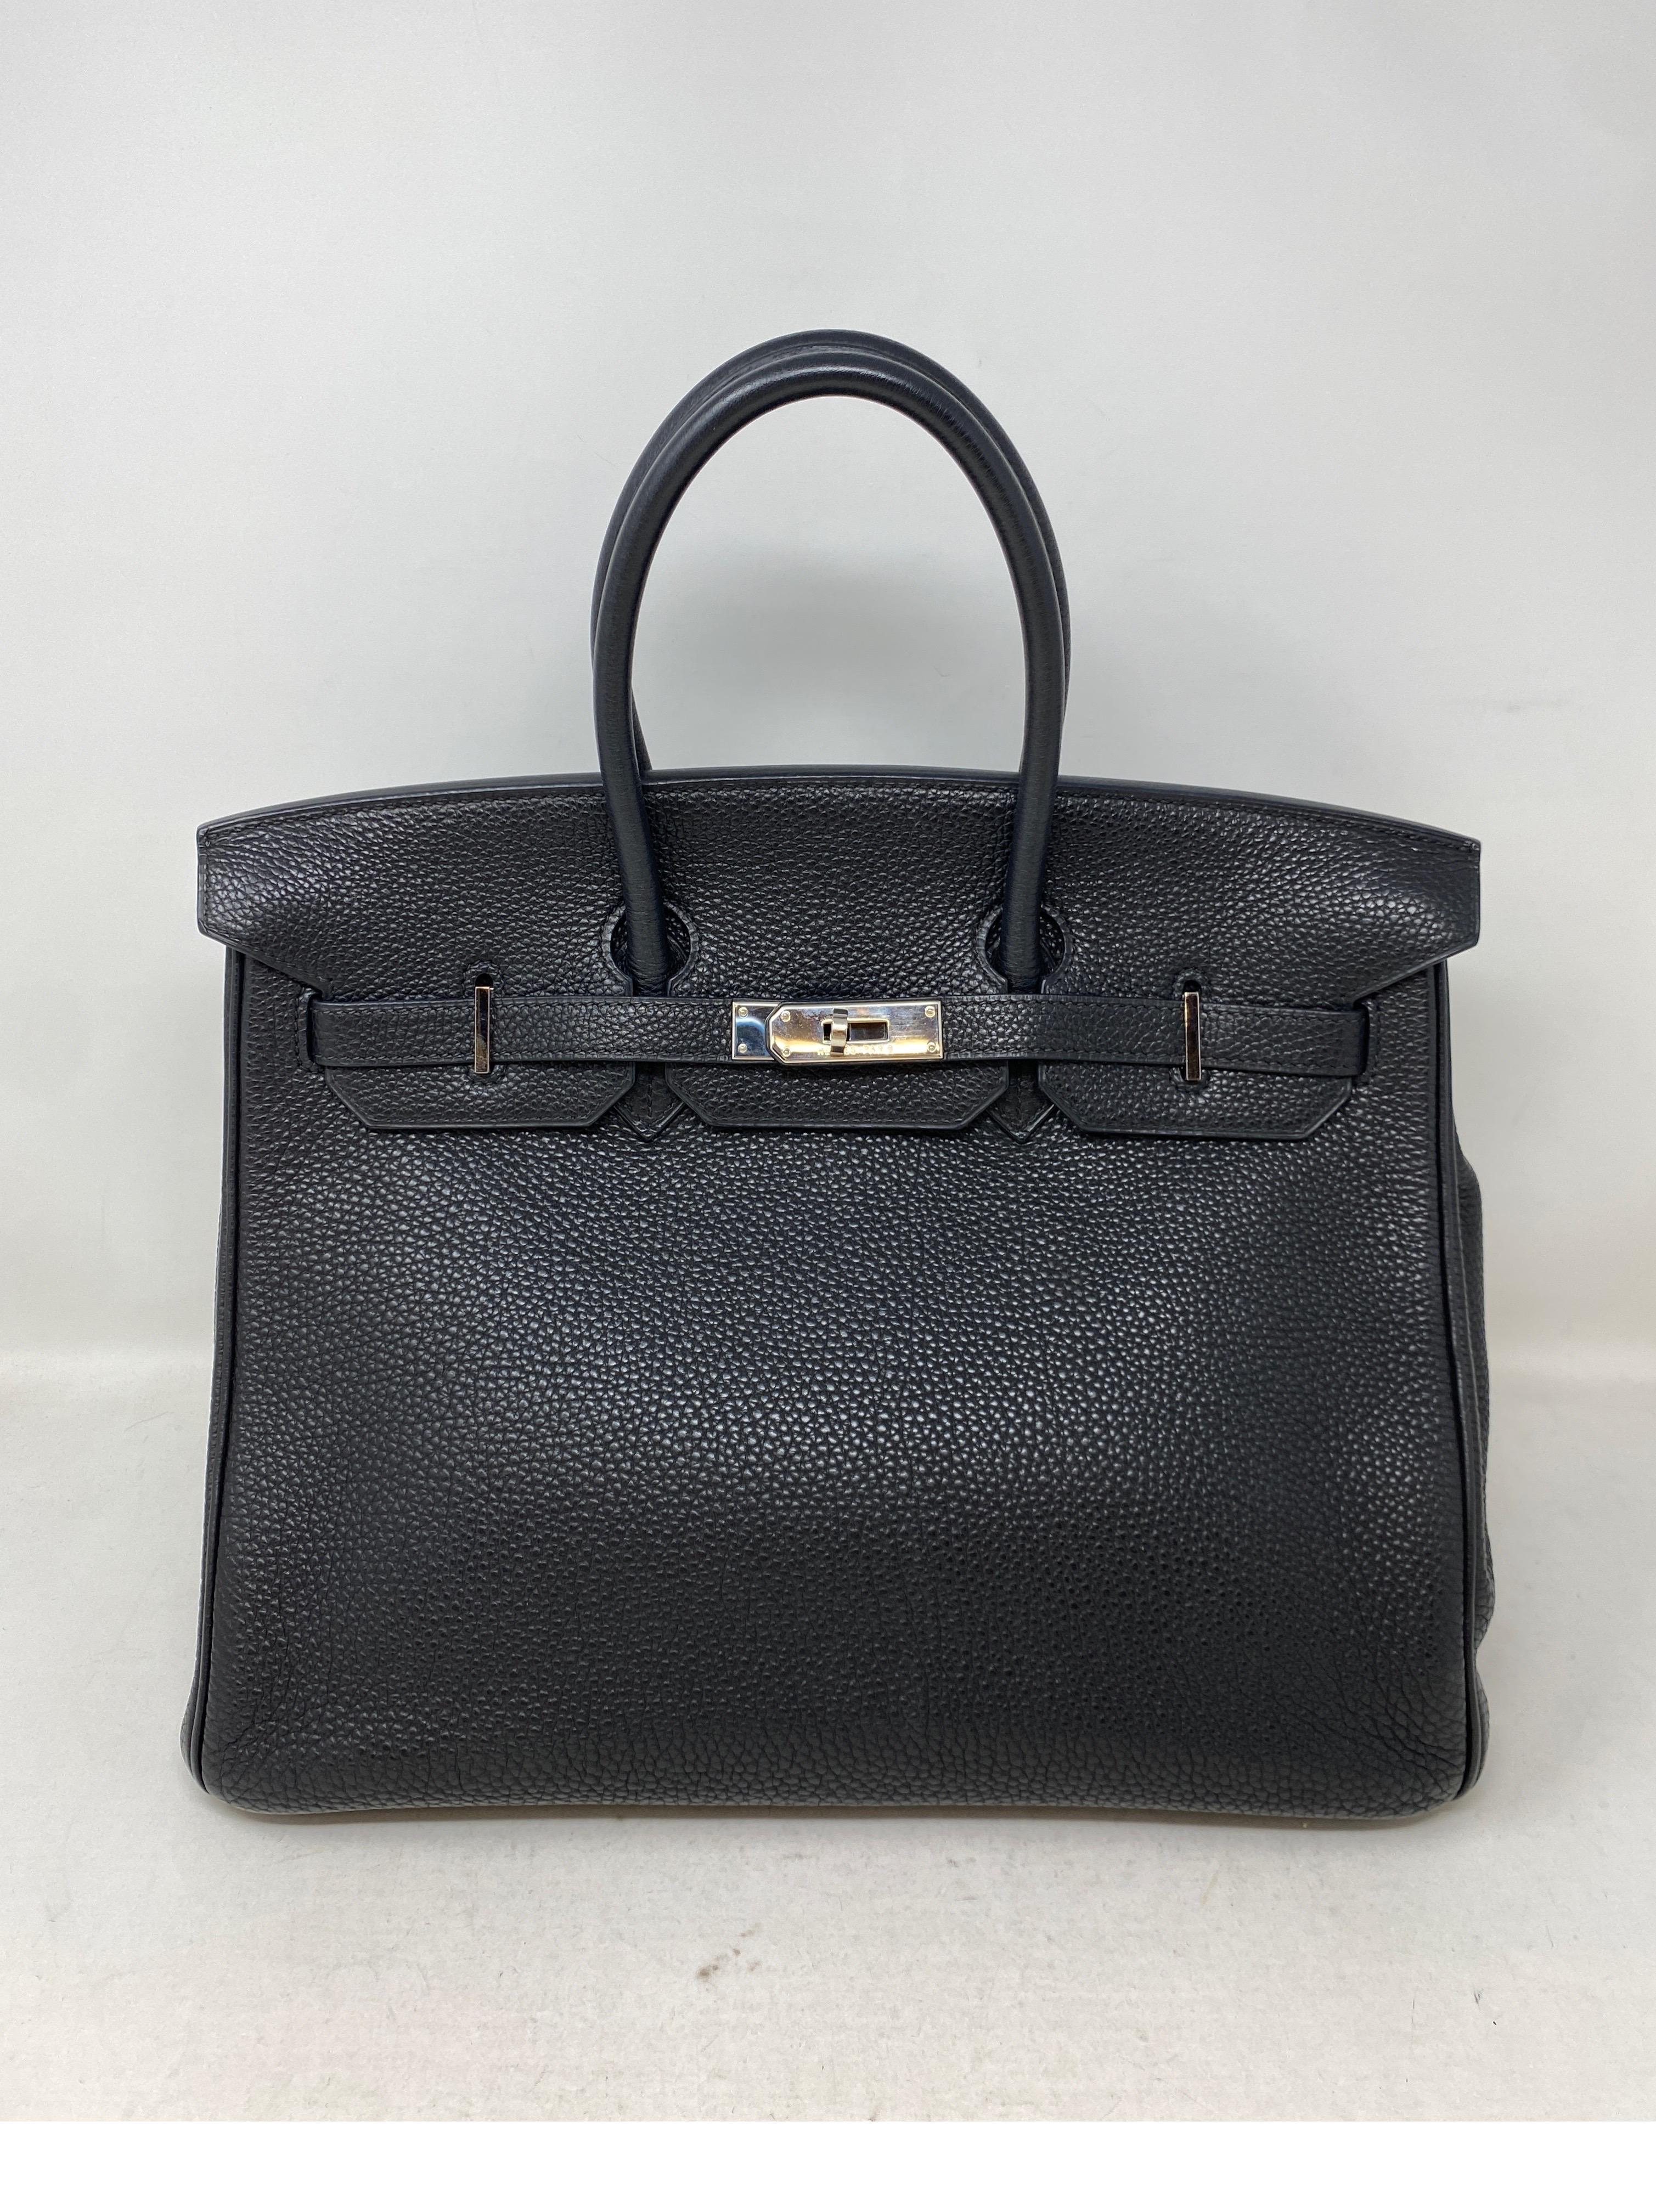 Hermes Black Birkin 35 Bag. Silver palladium hardware. Classic black. Most wanted color. Excellent condition. Includes clcohette, lock, keys, and dust bag. Guaranteed authentic. 